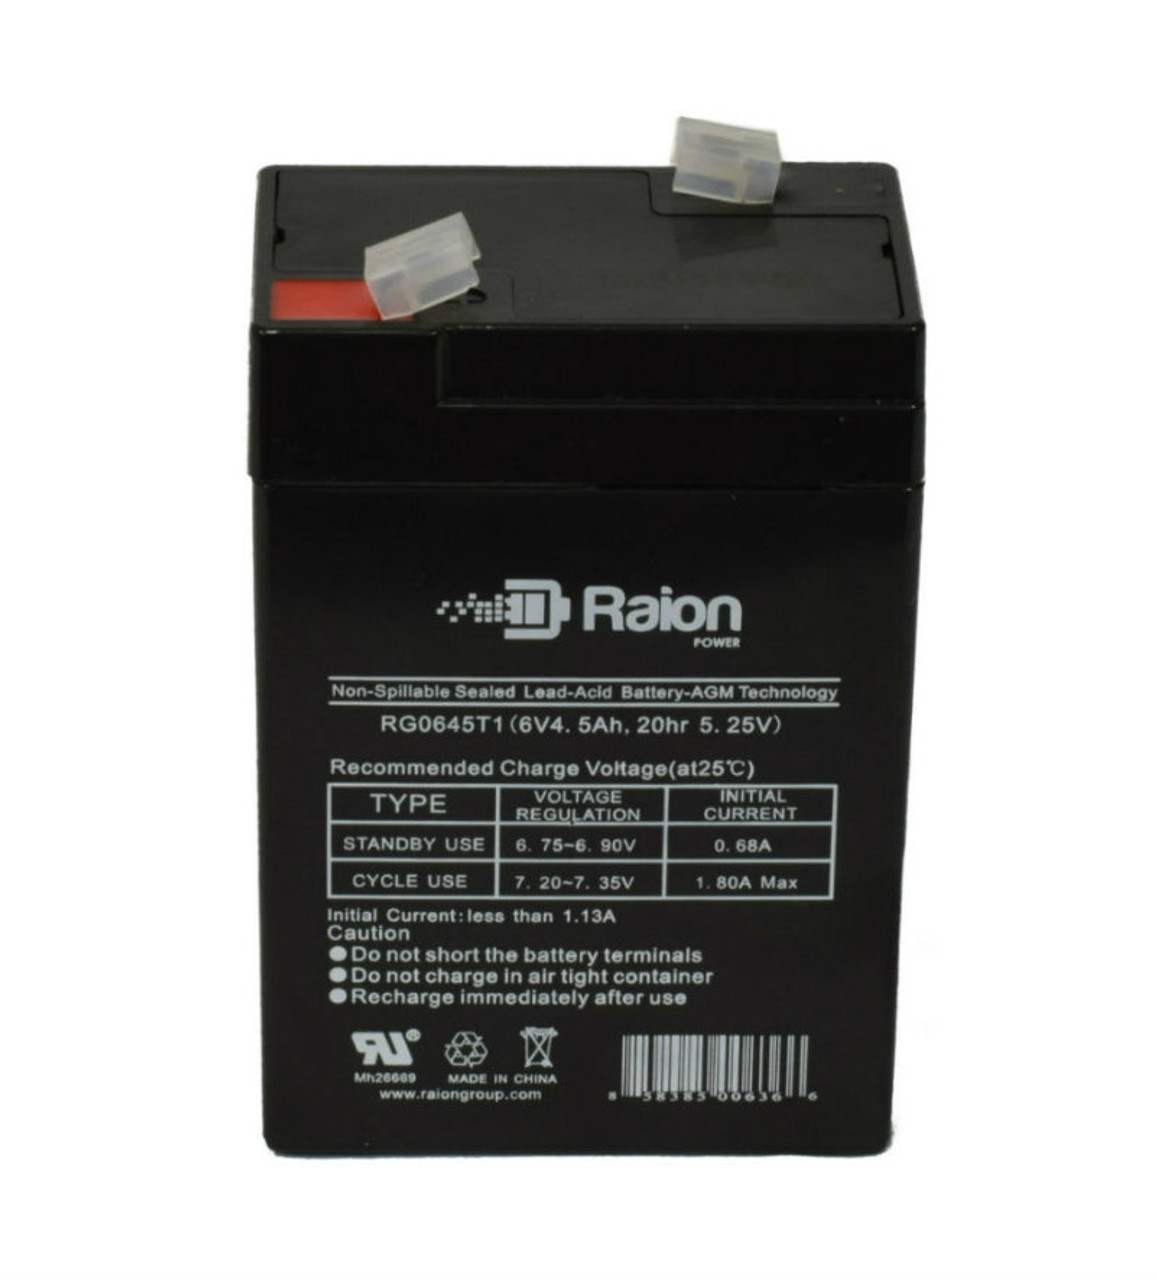 Raion Power RG0645T1 Replacement Battery Cartridge for SEC 6-MP-4.5